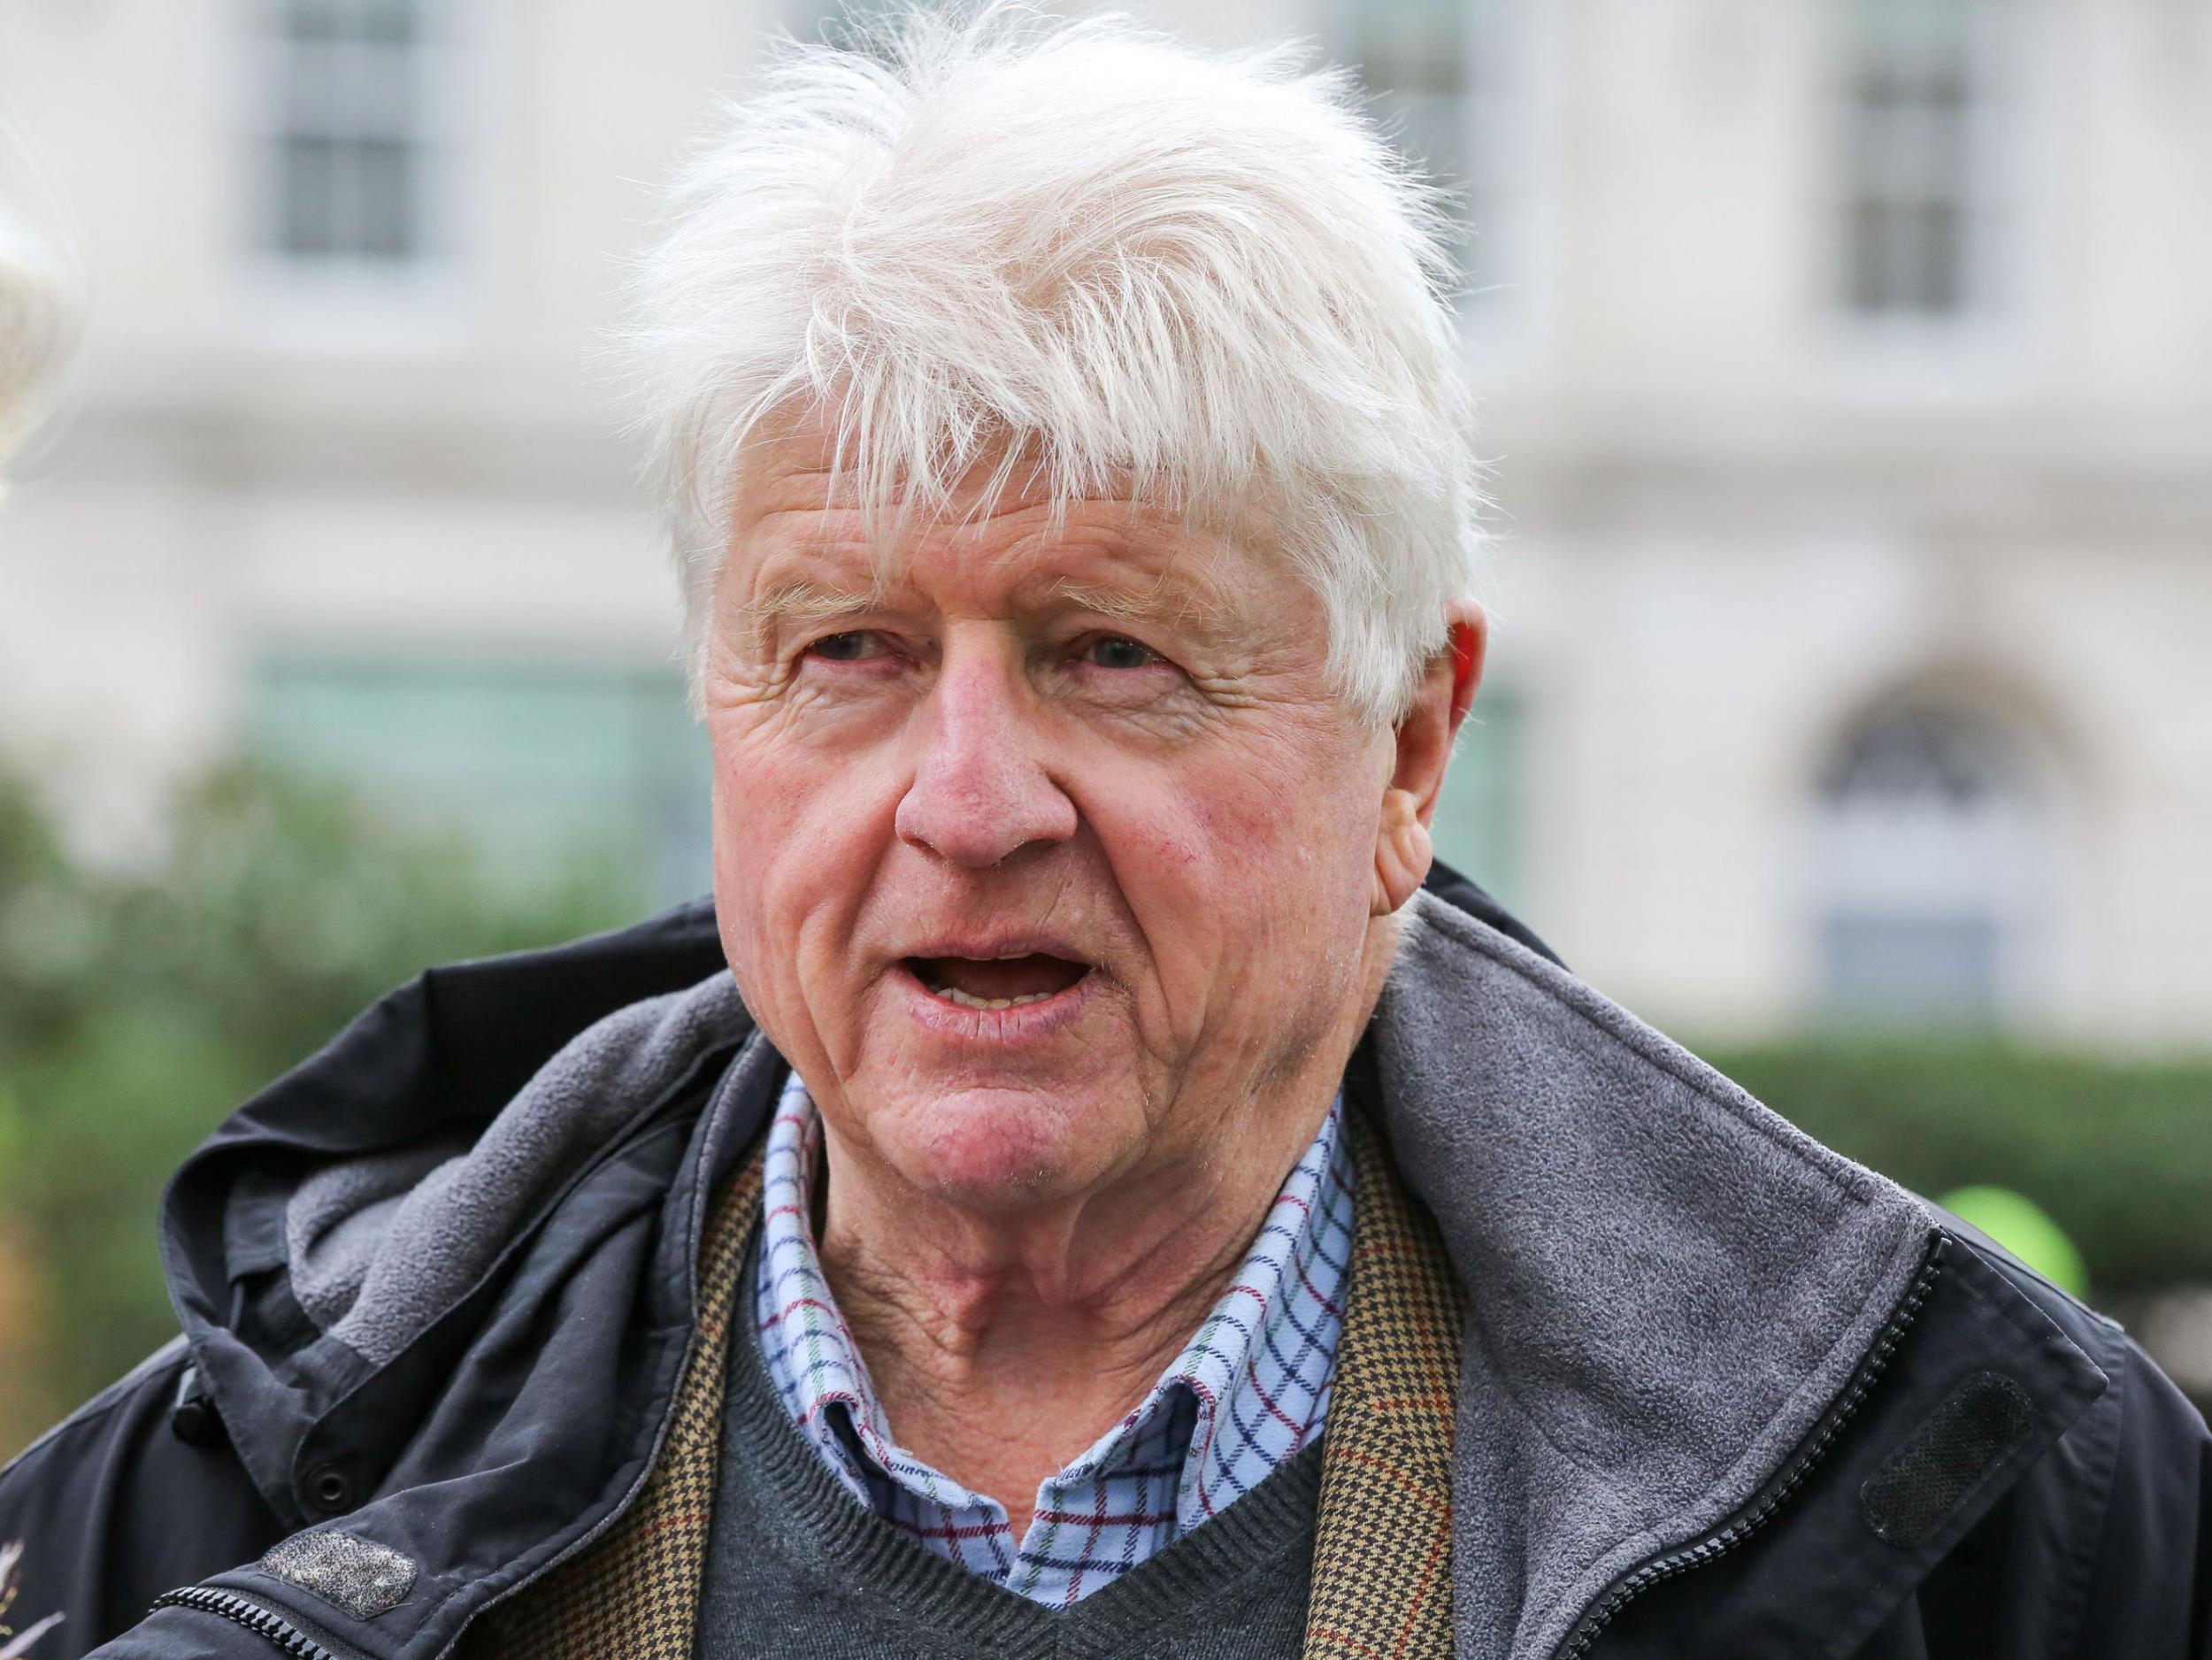 Stanley Johnson will travel with his ‘eyes open’ to any human rights abuses in the province